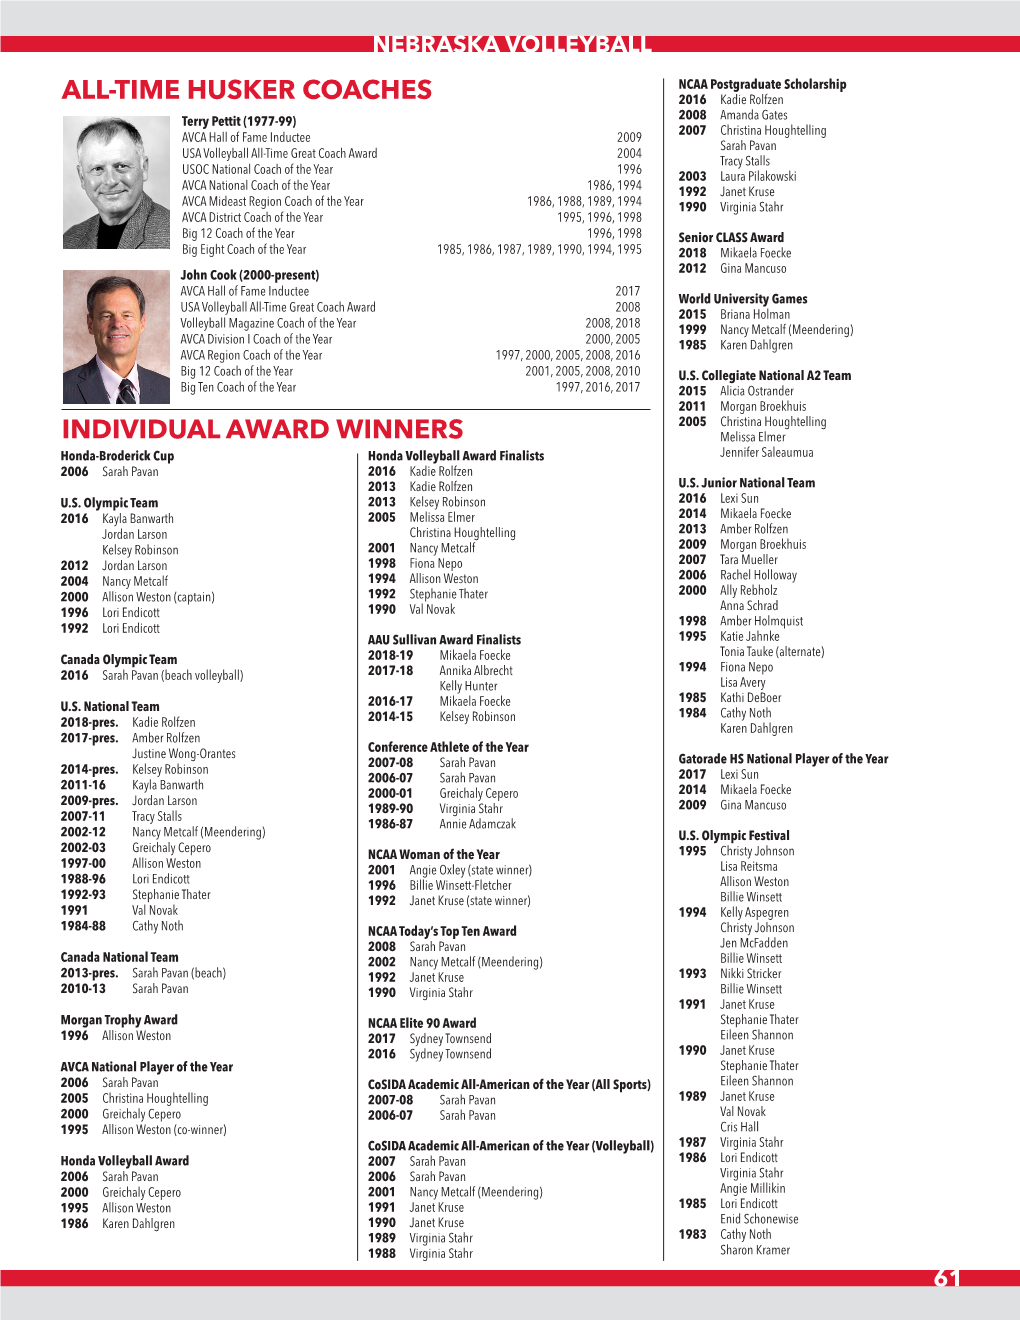 All-Time Husker Coaches Individual Award Winners